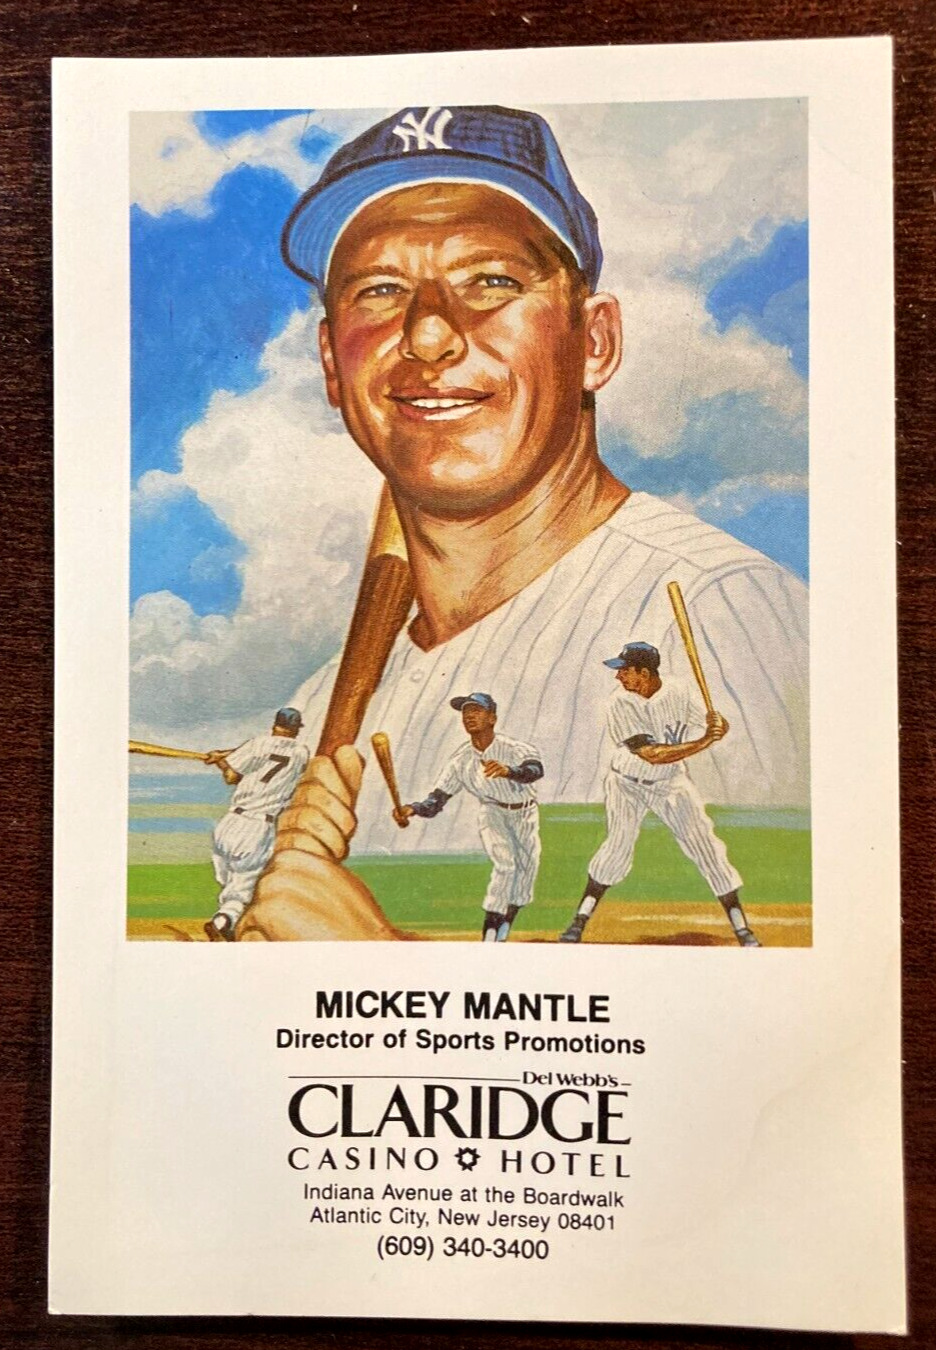 Mickey Mantle Vintage Claridge Casino Hotel Promotion Card (VG, waves in card)